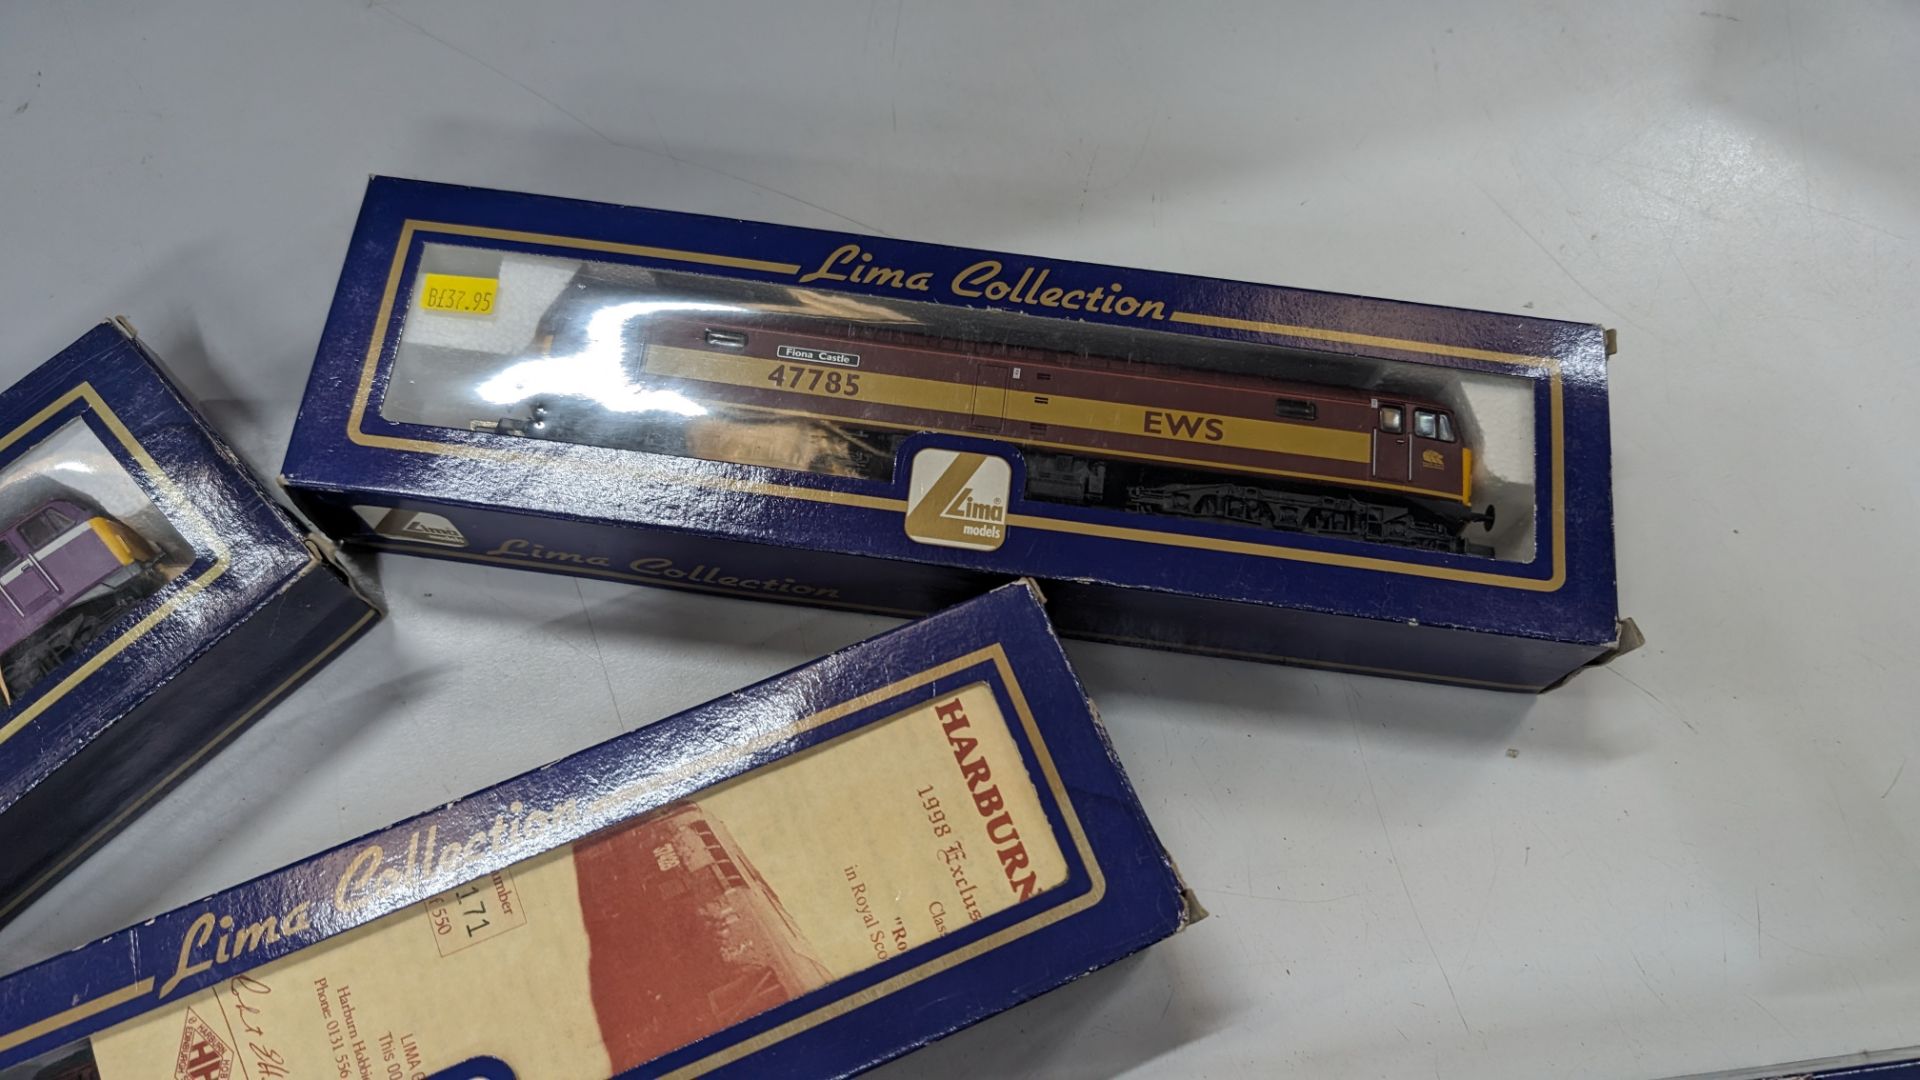 5 off Lima Collection 00 assorted model trains - Image 4 of 11